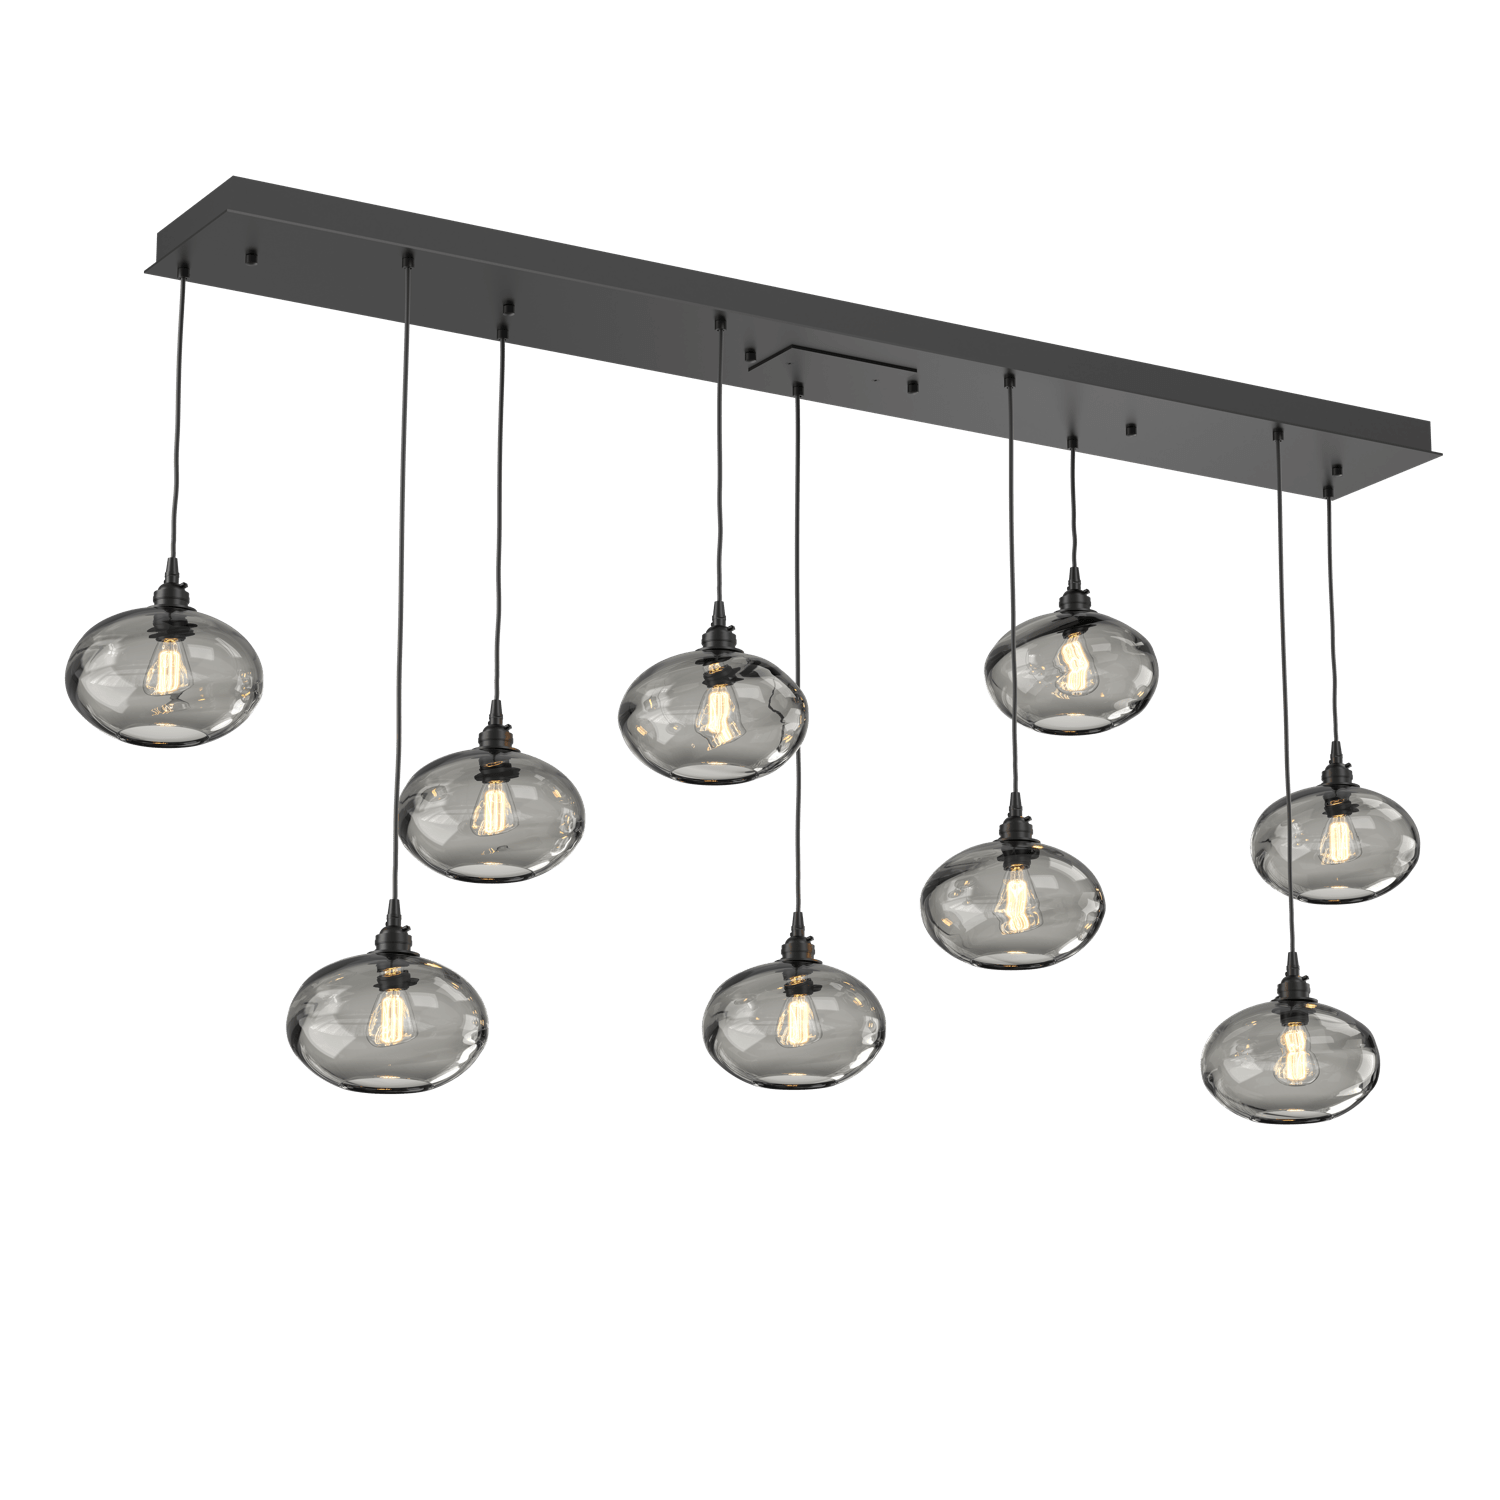 PLB0036-09-MB-OS-Hammerton-Studio-Optic-Blown-Glass-Coppa-9-light-linear-pendant-chandelier-with-matte-black-finish-and-optic-smoke-blown-glass-shades-and-incandescent-lamping